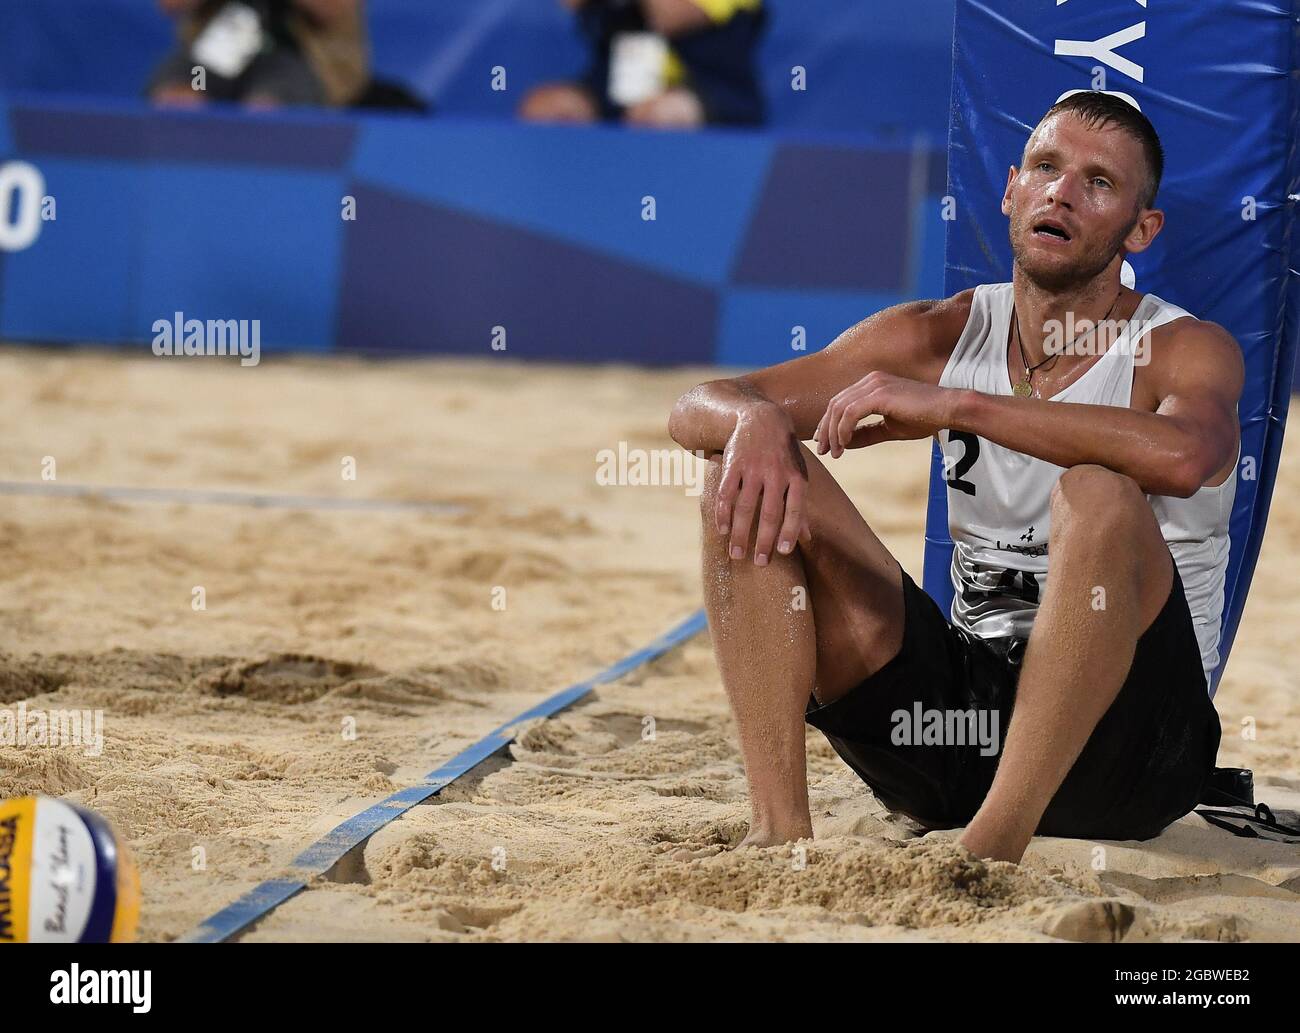 Tokyo, Japan. 5th Aug, 2021. Edgars Tocs of Latvia reacts during the men's beach volleyball semifinal between Anders Berntsen Mol/Christian Sandlie Sorum of Norway and Martins Plavins/Edgars Tocs of Latvia at the Tokyo 2020 Olympic Games in Tokyo, Japan, Aug. 5, 2021. Credit: Li He/Xinhua/Alamy Live News Stock Photo